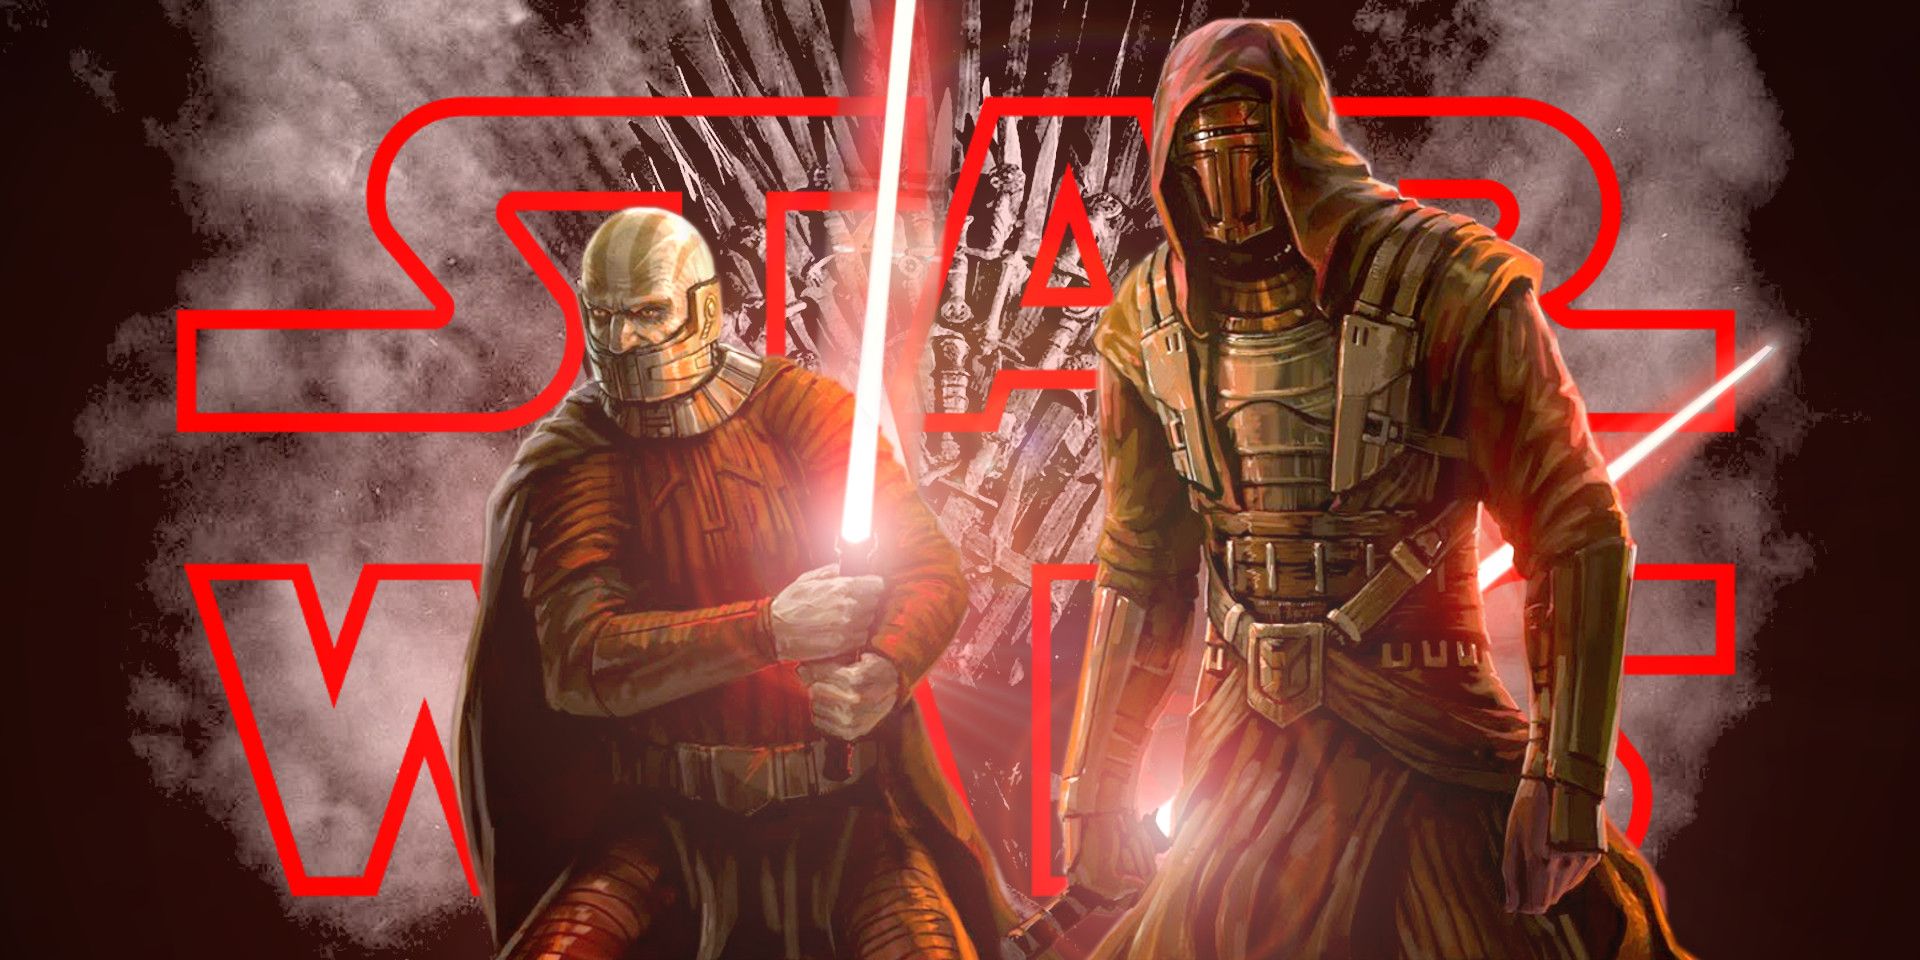 Is Star Wars Finally Adapting Knights Of The Old Republic